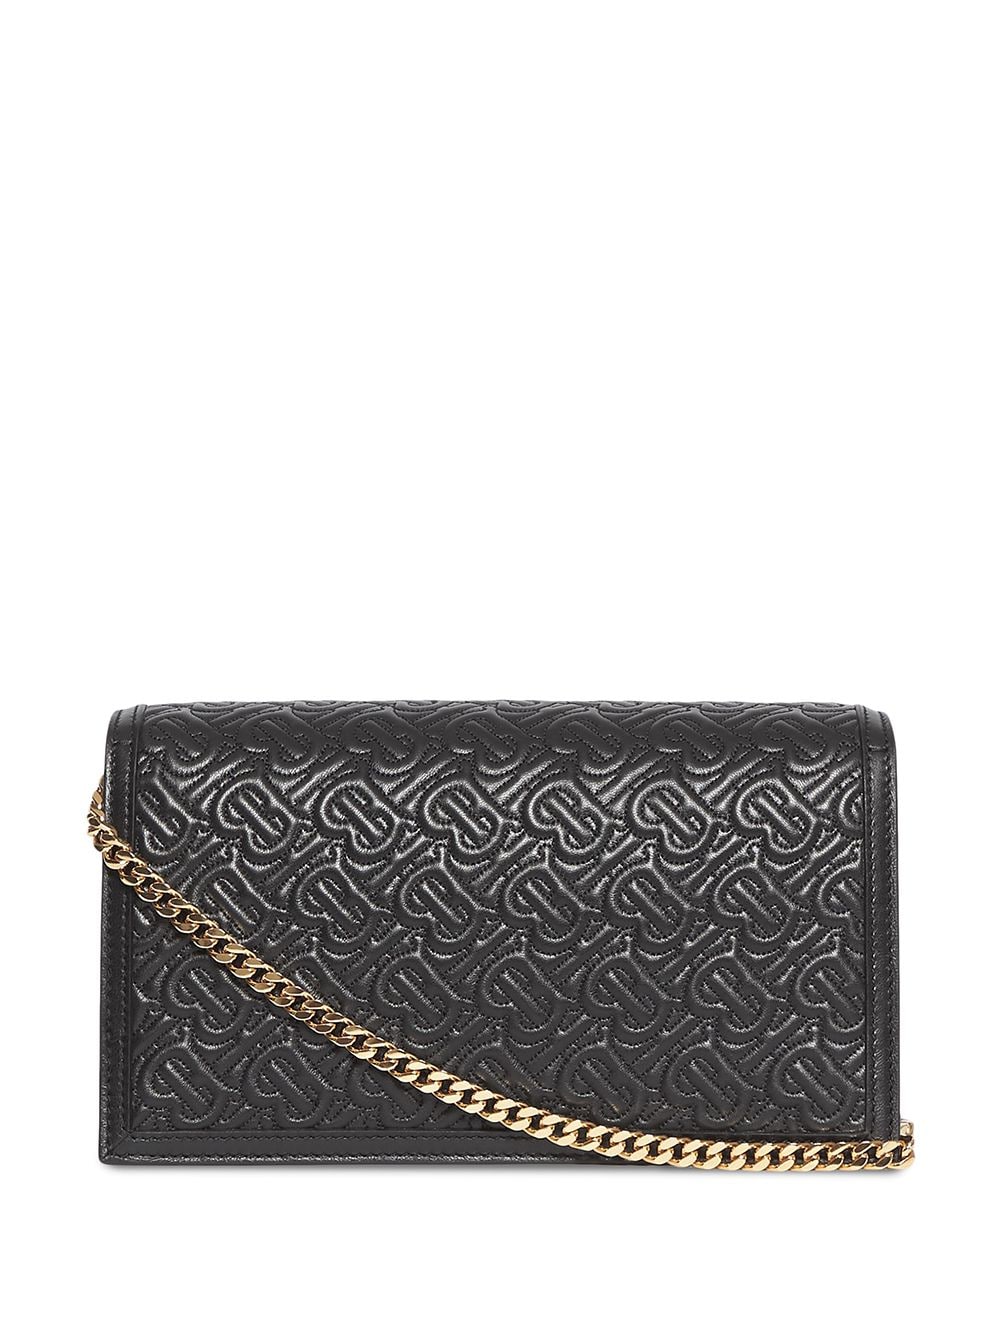 Burberry Quilted Monogram Clutch - Farfetch